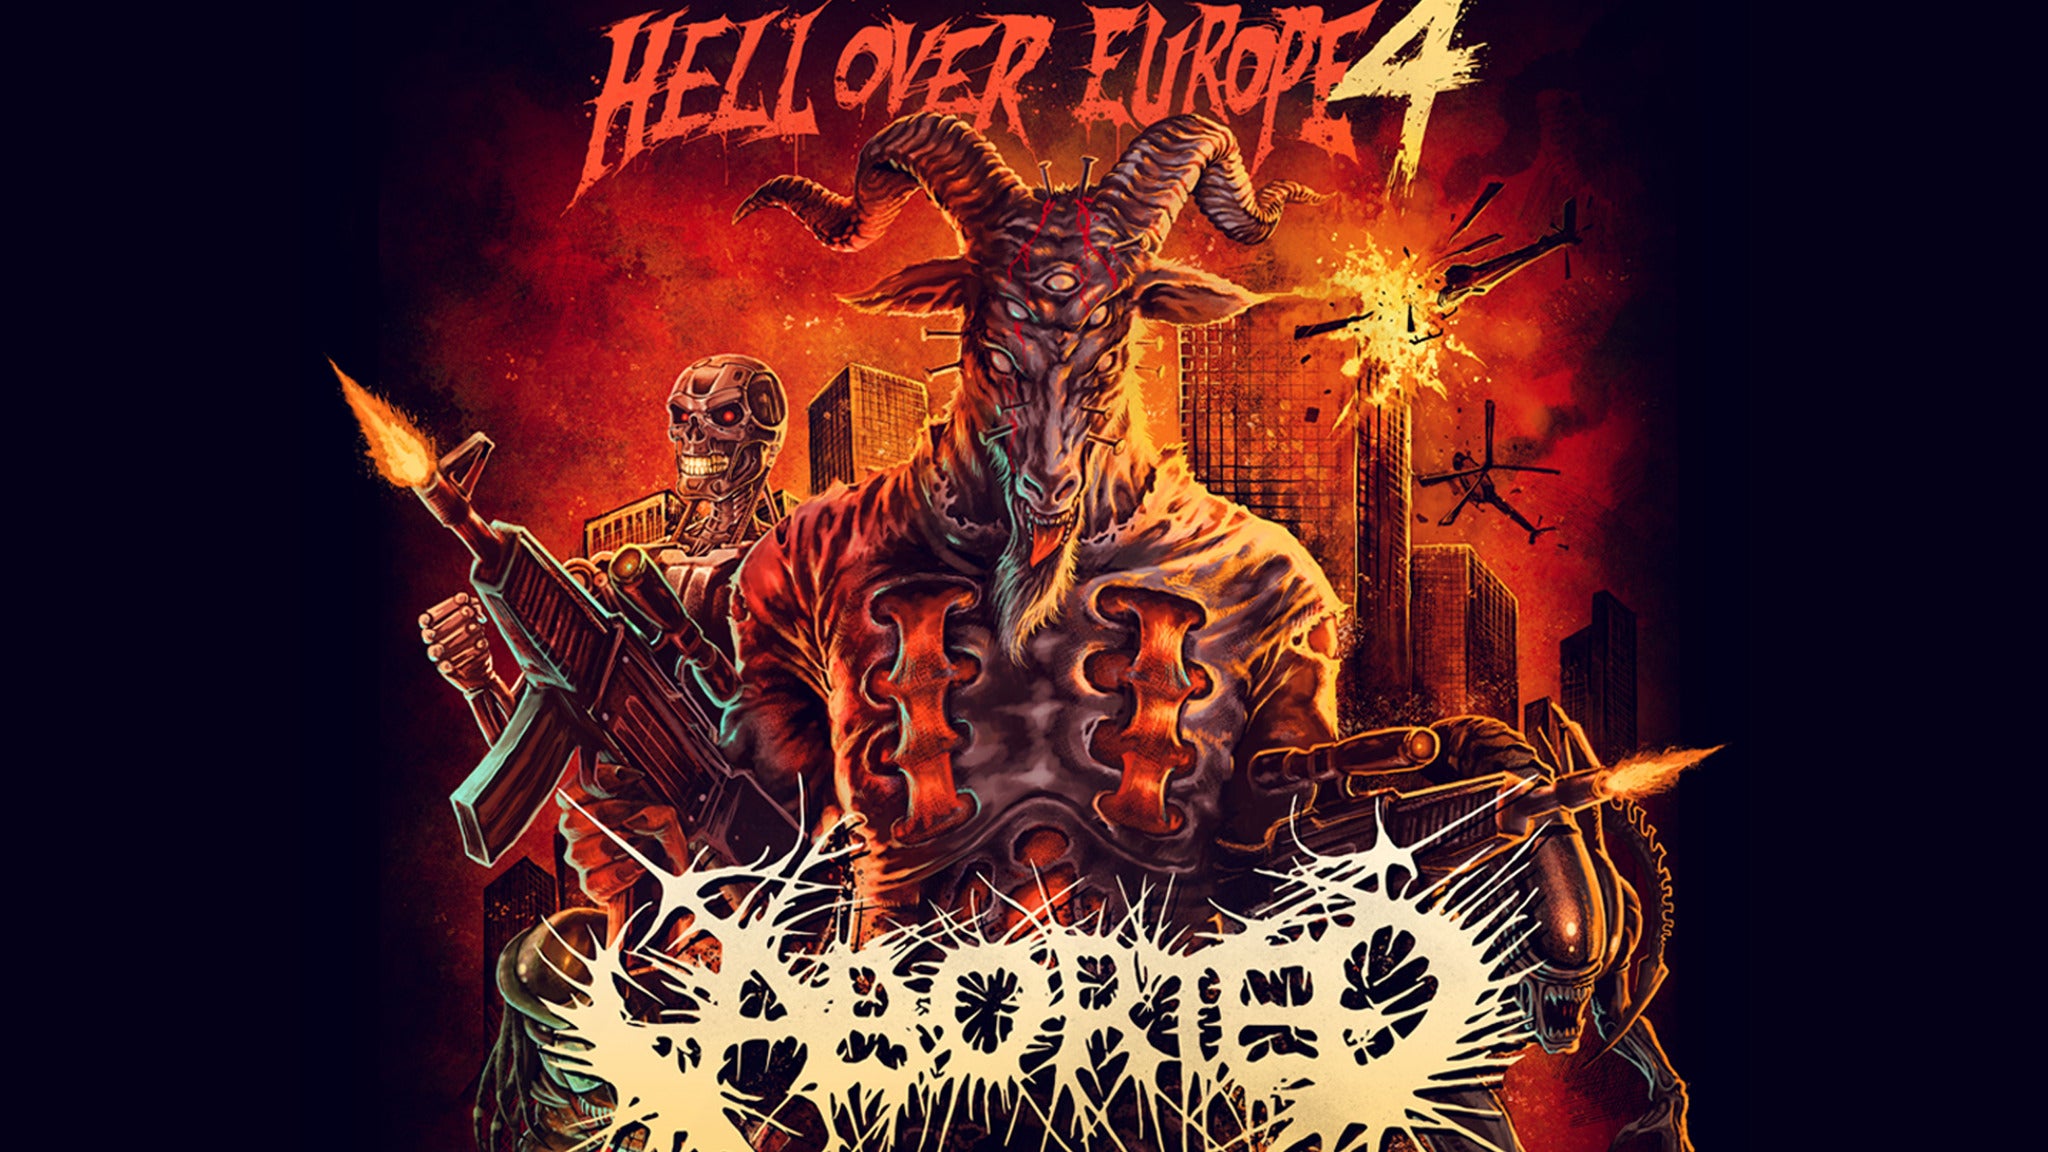 Aborted - Hell over Europe 4 Tour